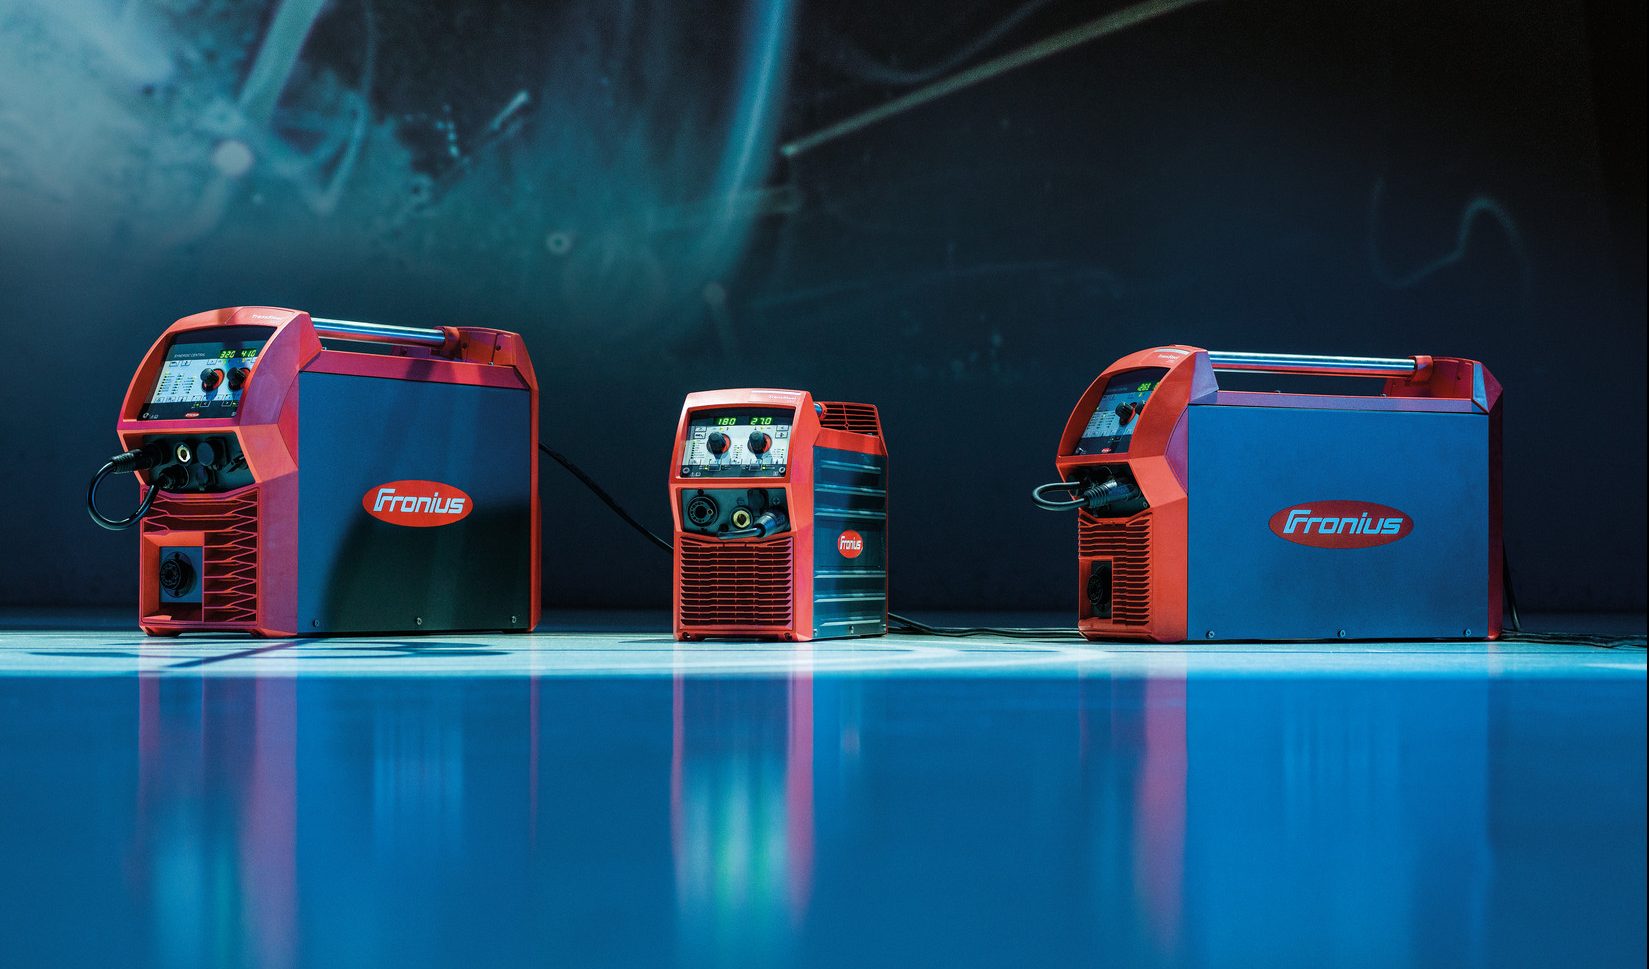 Ready for any challenge: The TransSteel multiprocess welding system series from Fronius